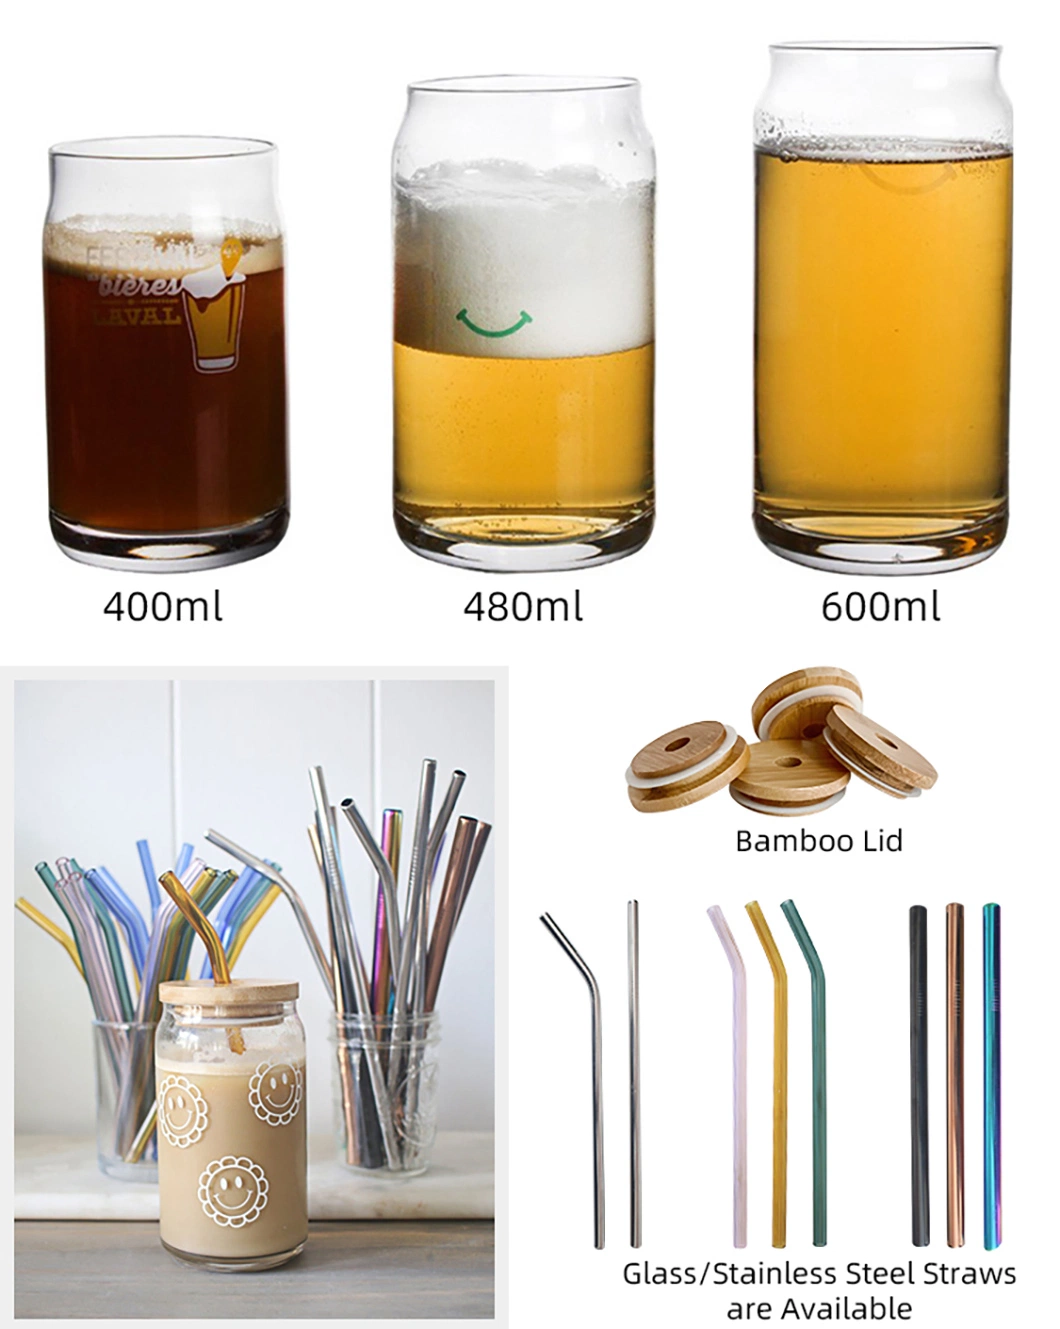 Amazon Hot Sale Drinking Glasses 6 PCS 16oz Soda Can Shaped Glass Cups Set with Straw for Smoothie Boba Tea Whiskey Water Iced Coffee